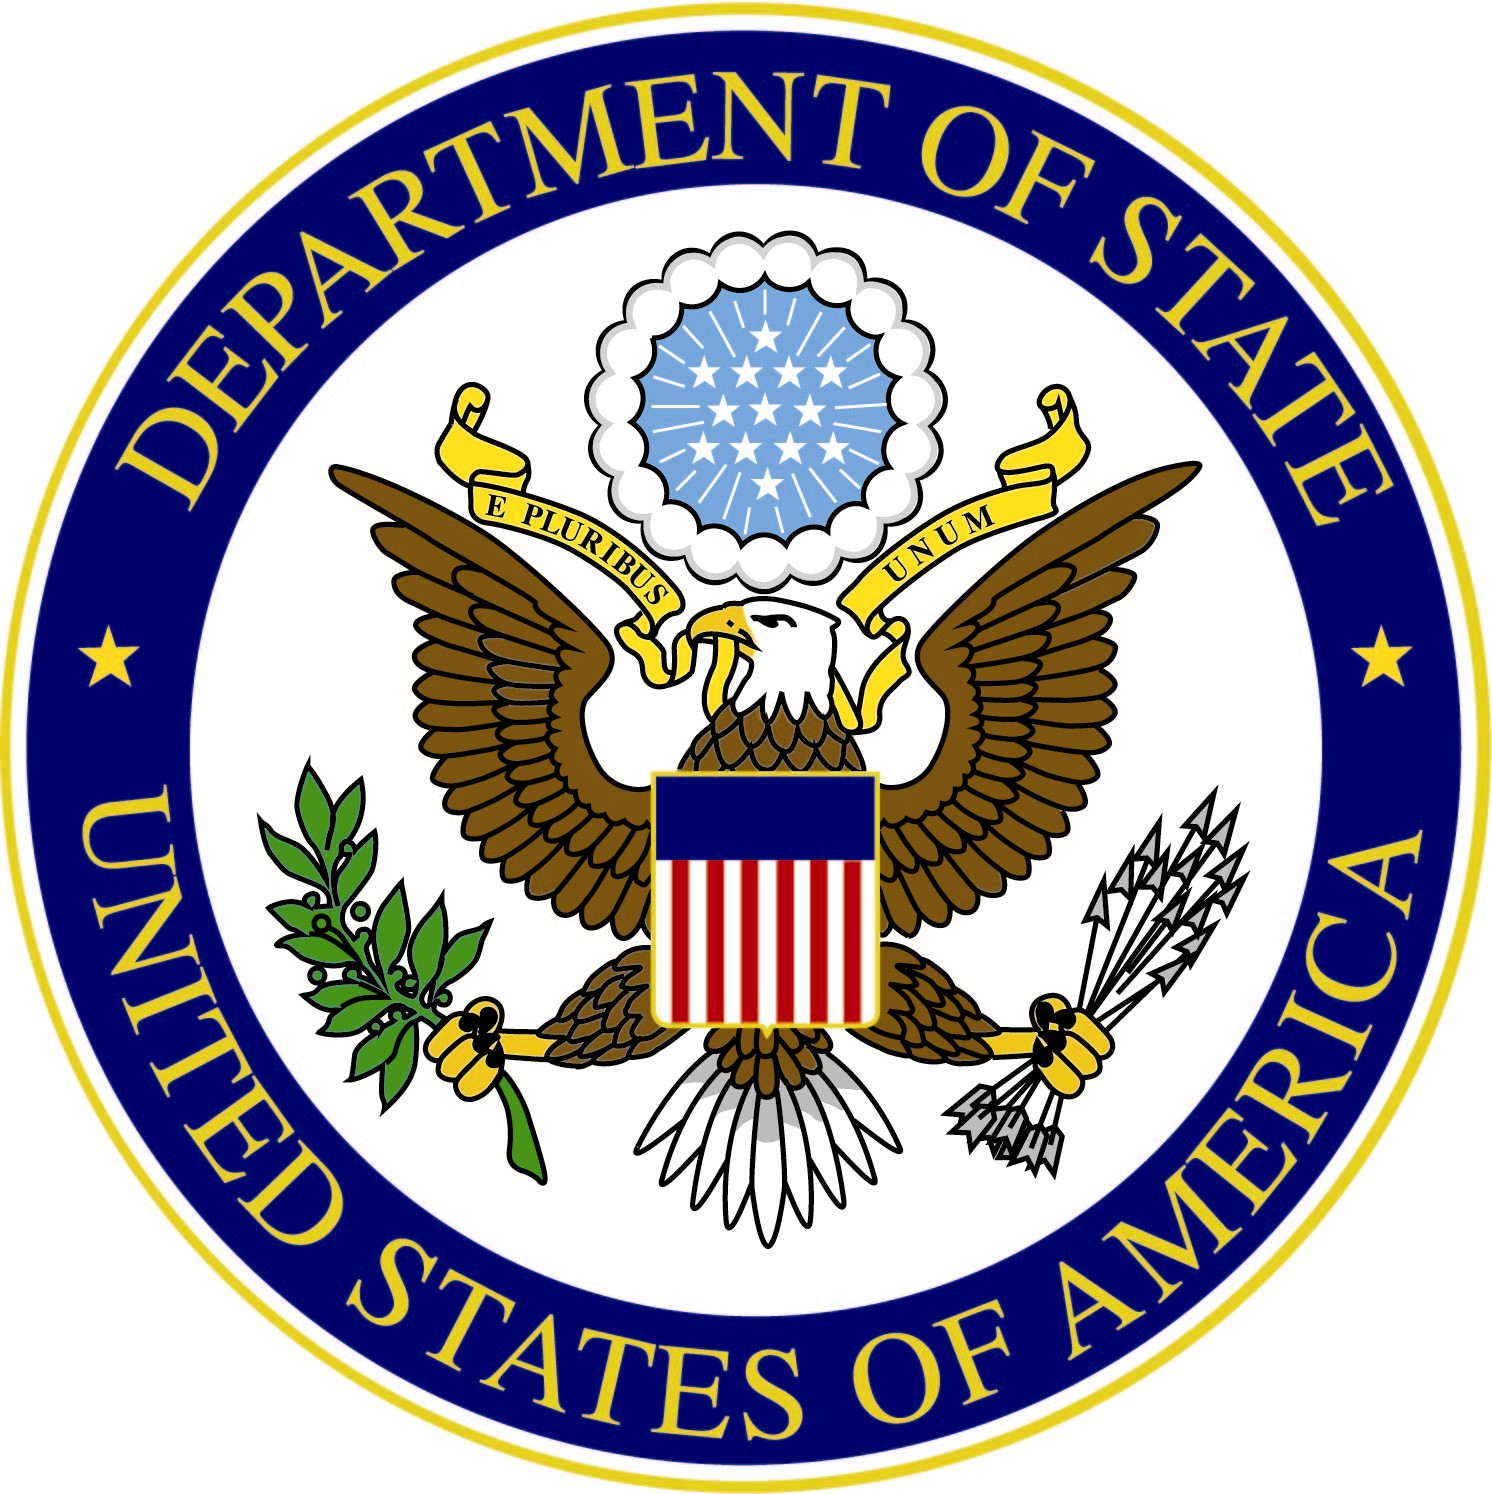 United States (U.S.) Embassy Statement on Democratic Republic of the Congo (DRC) Elections